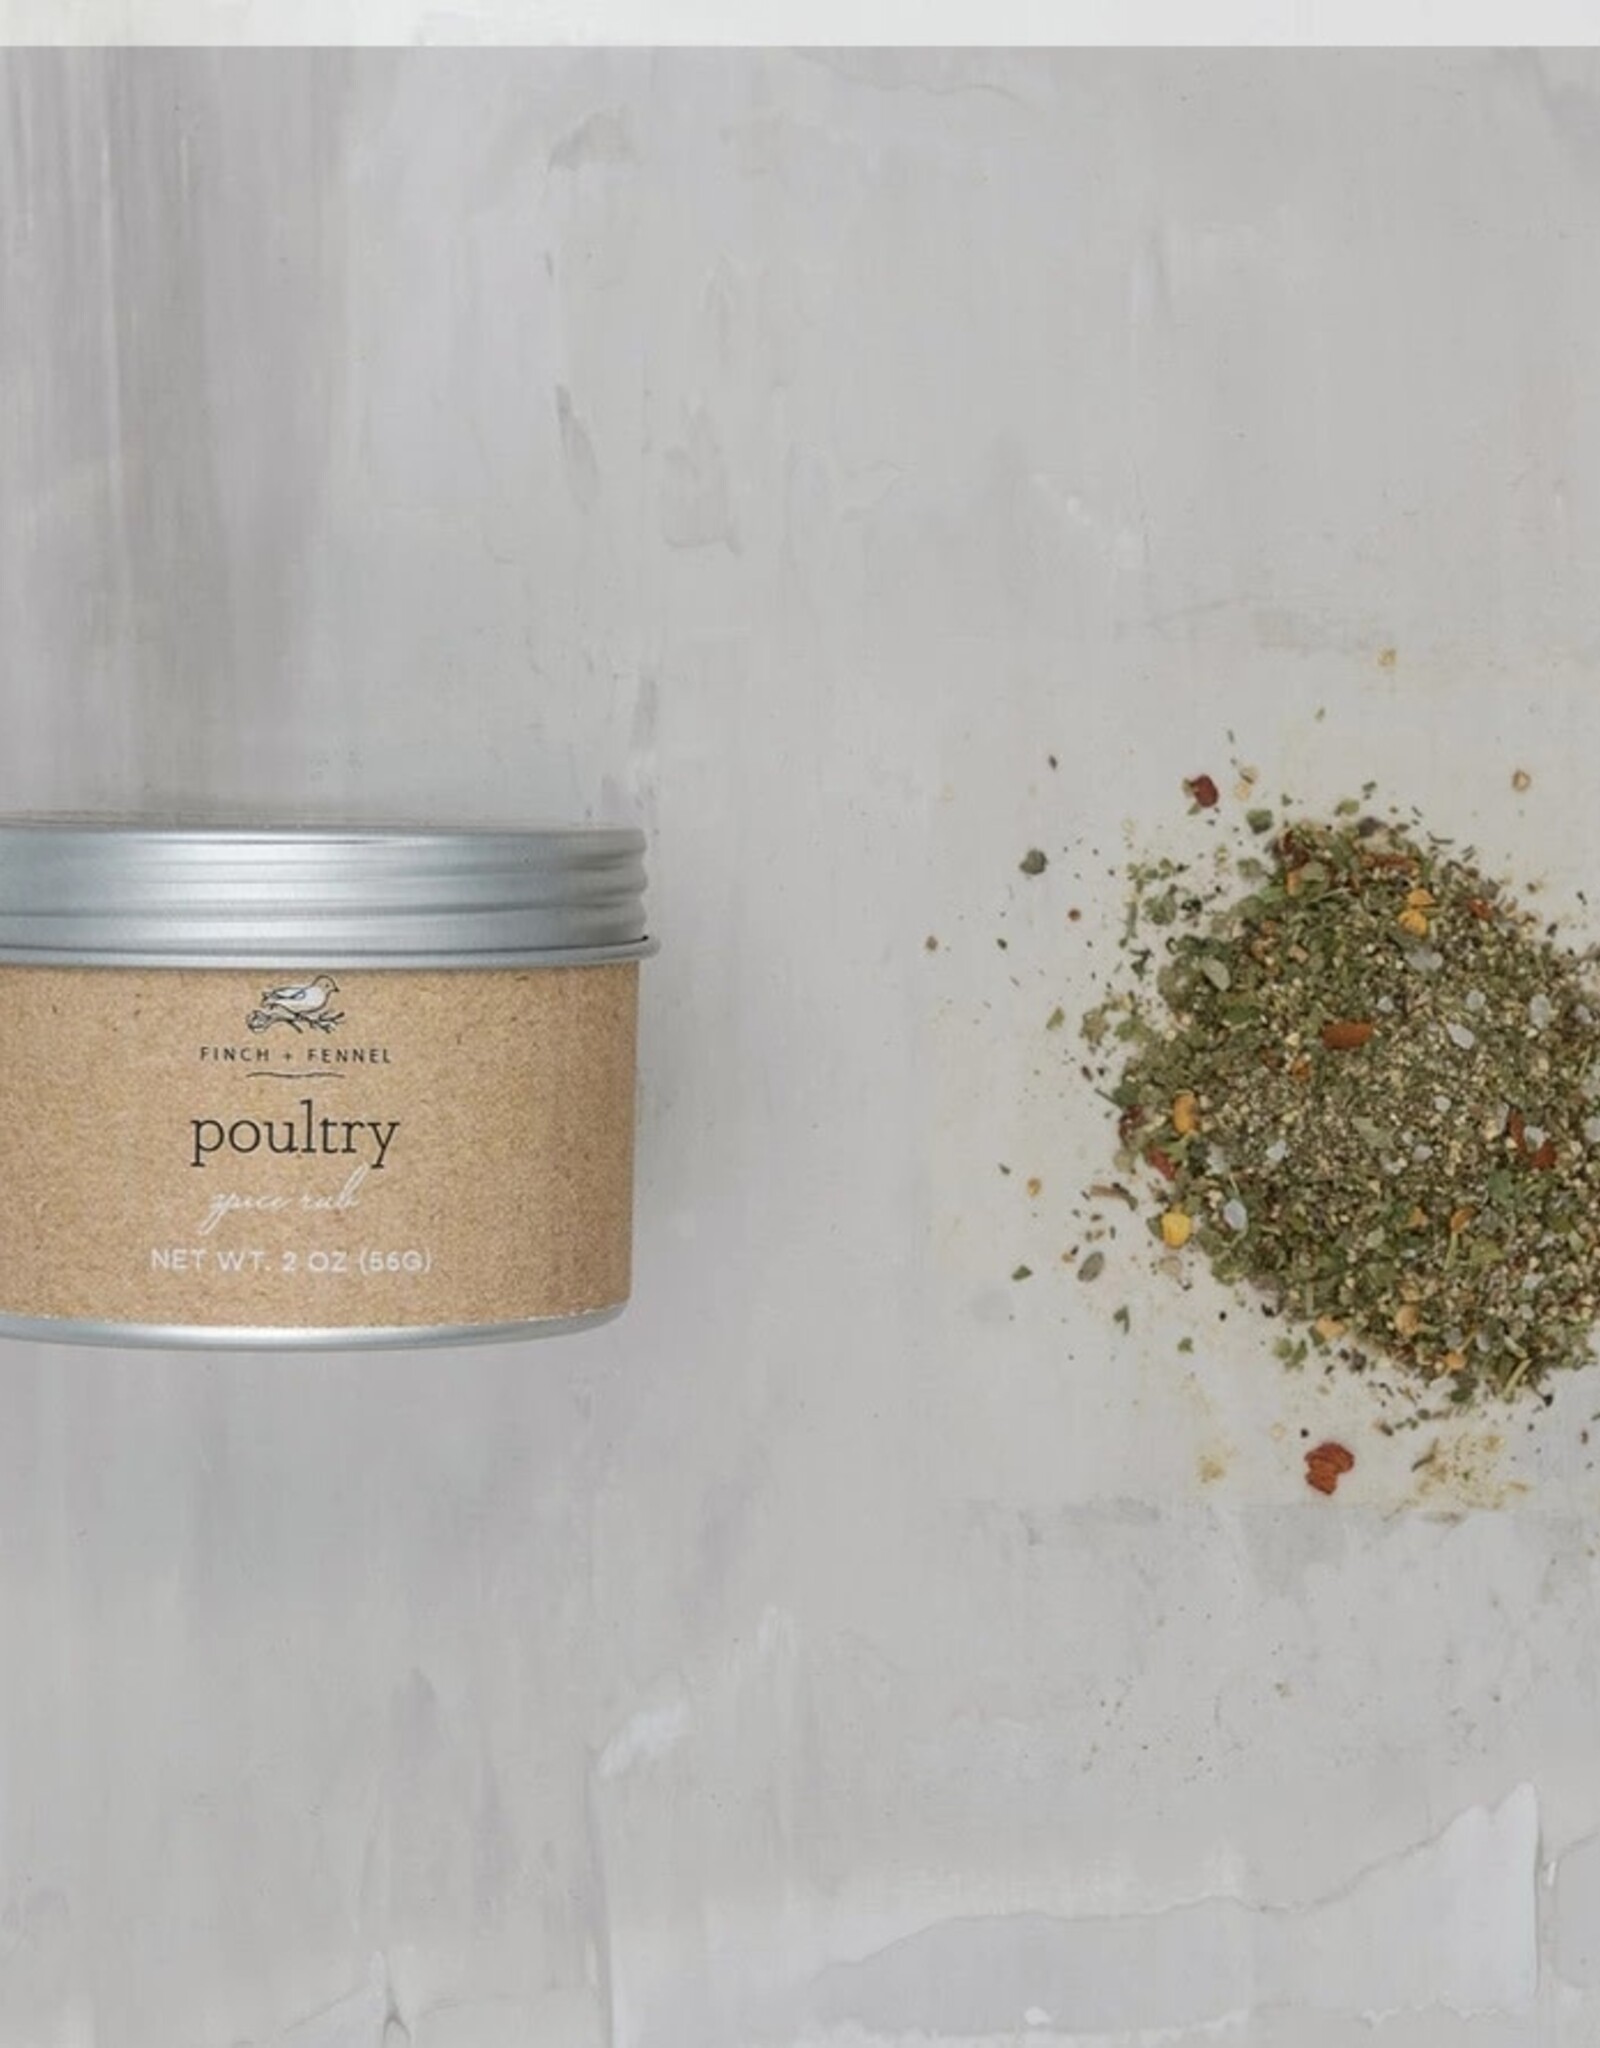 Creative Coop POULTRY SPICE RUB - Finch + Fennel